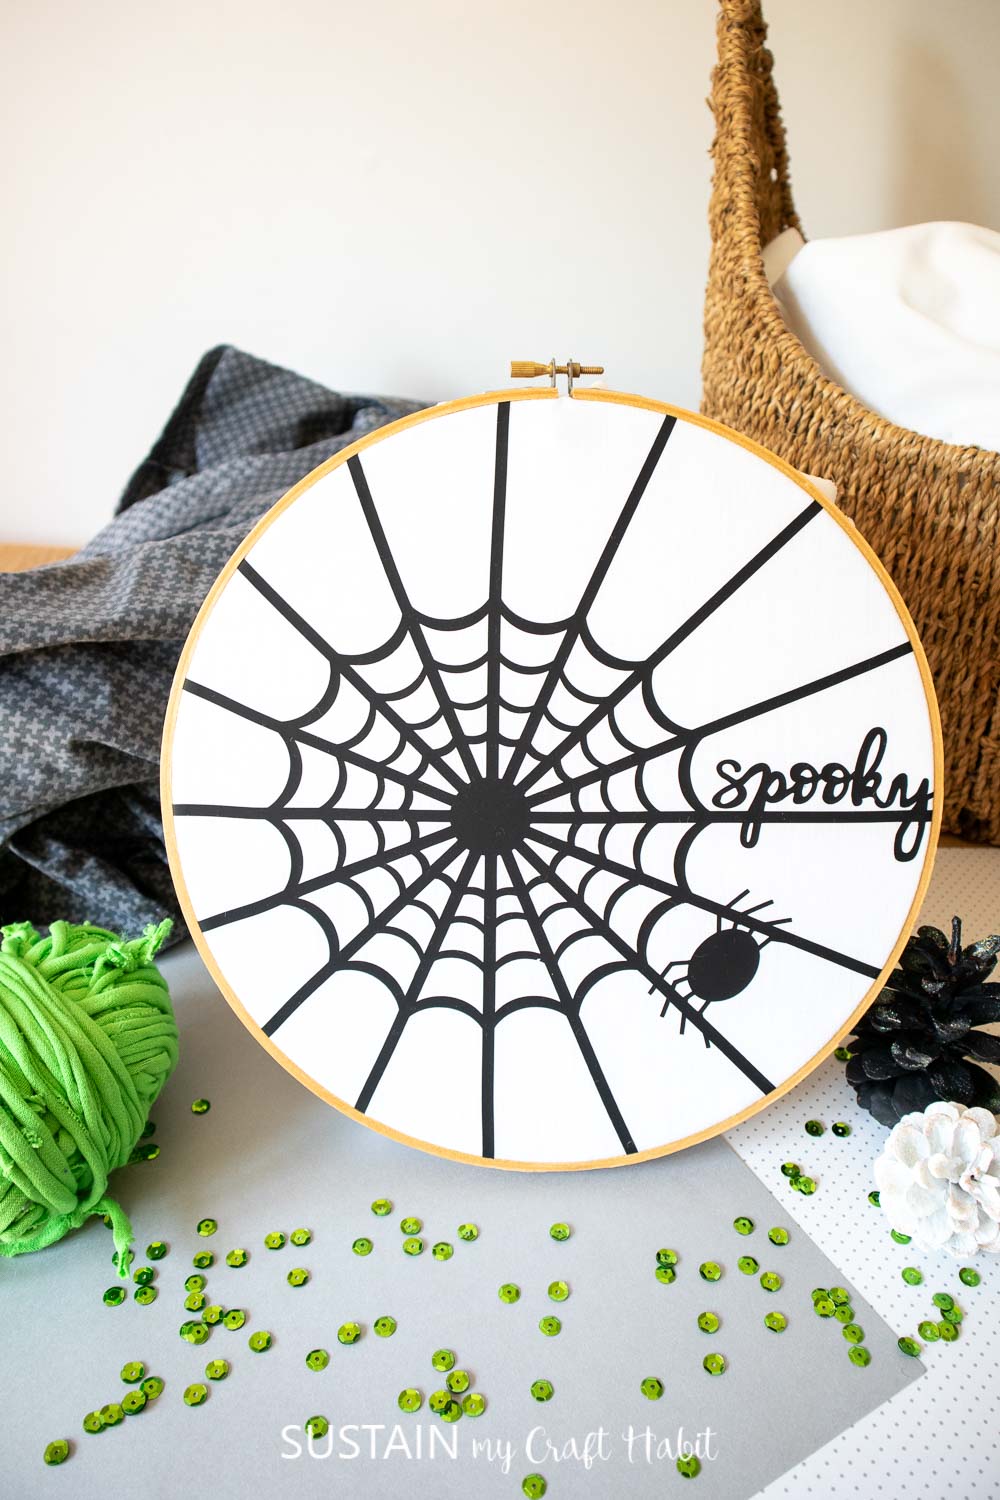 completed spider web art styled with green adn black accessories